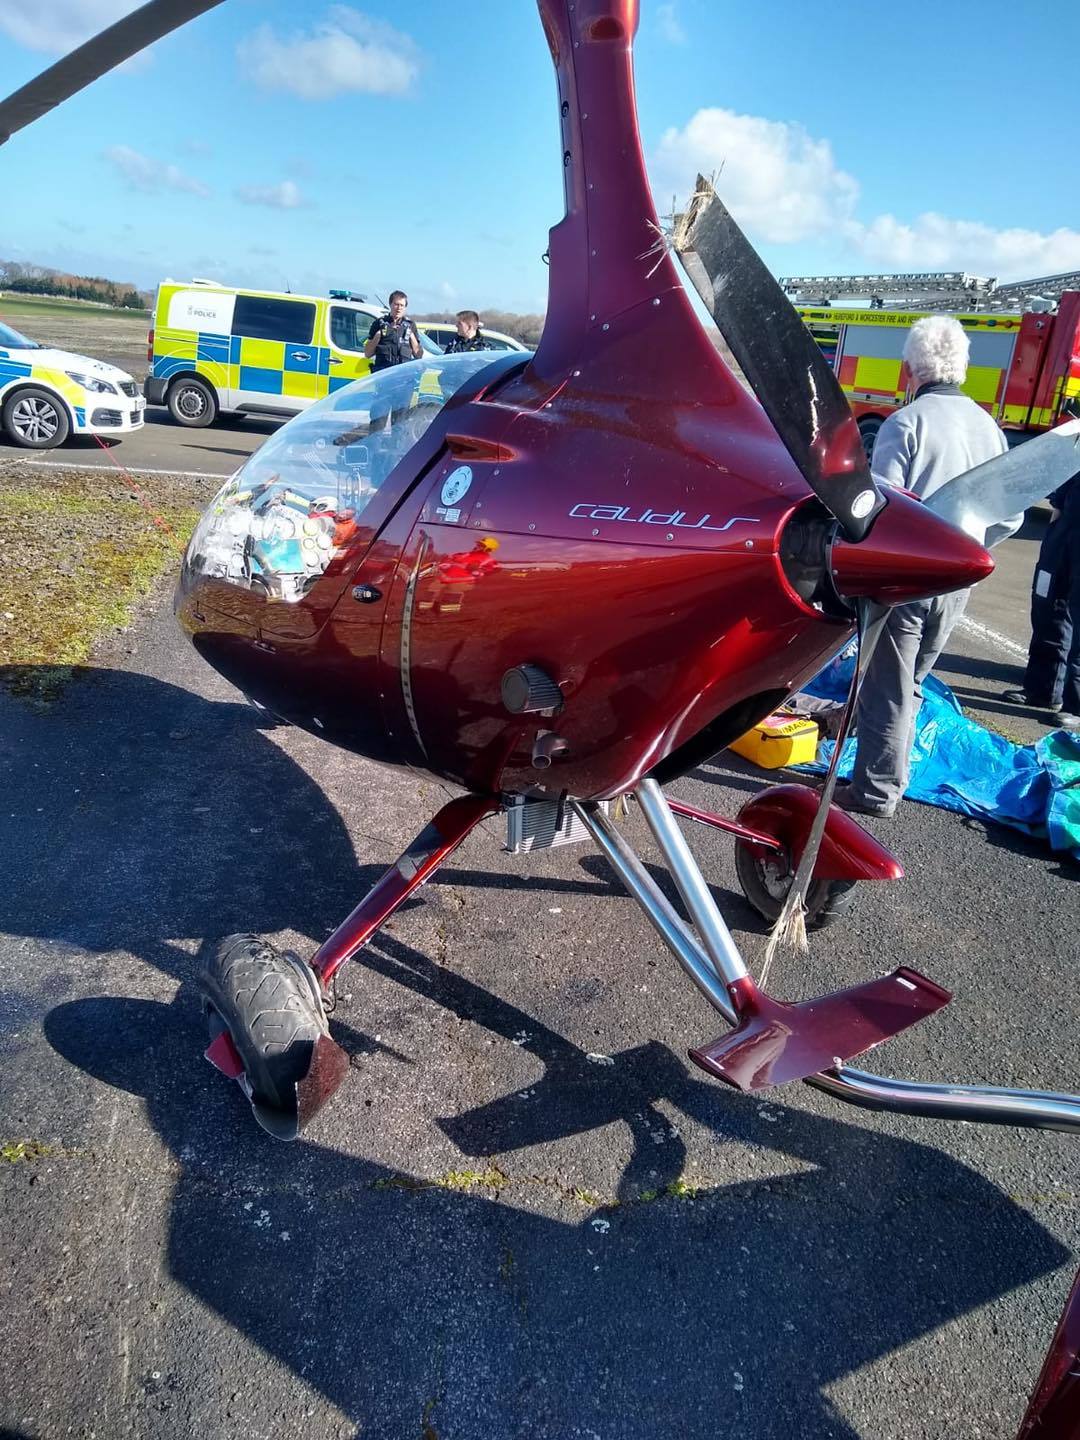 The student pilot and instructor were both trapped, but airfield staff righted the gyrocopter 